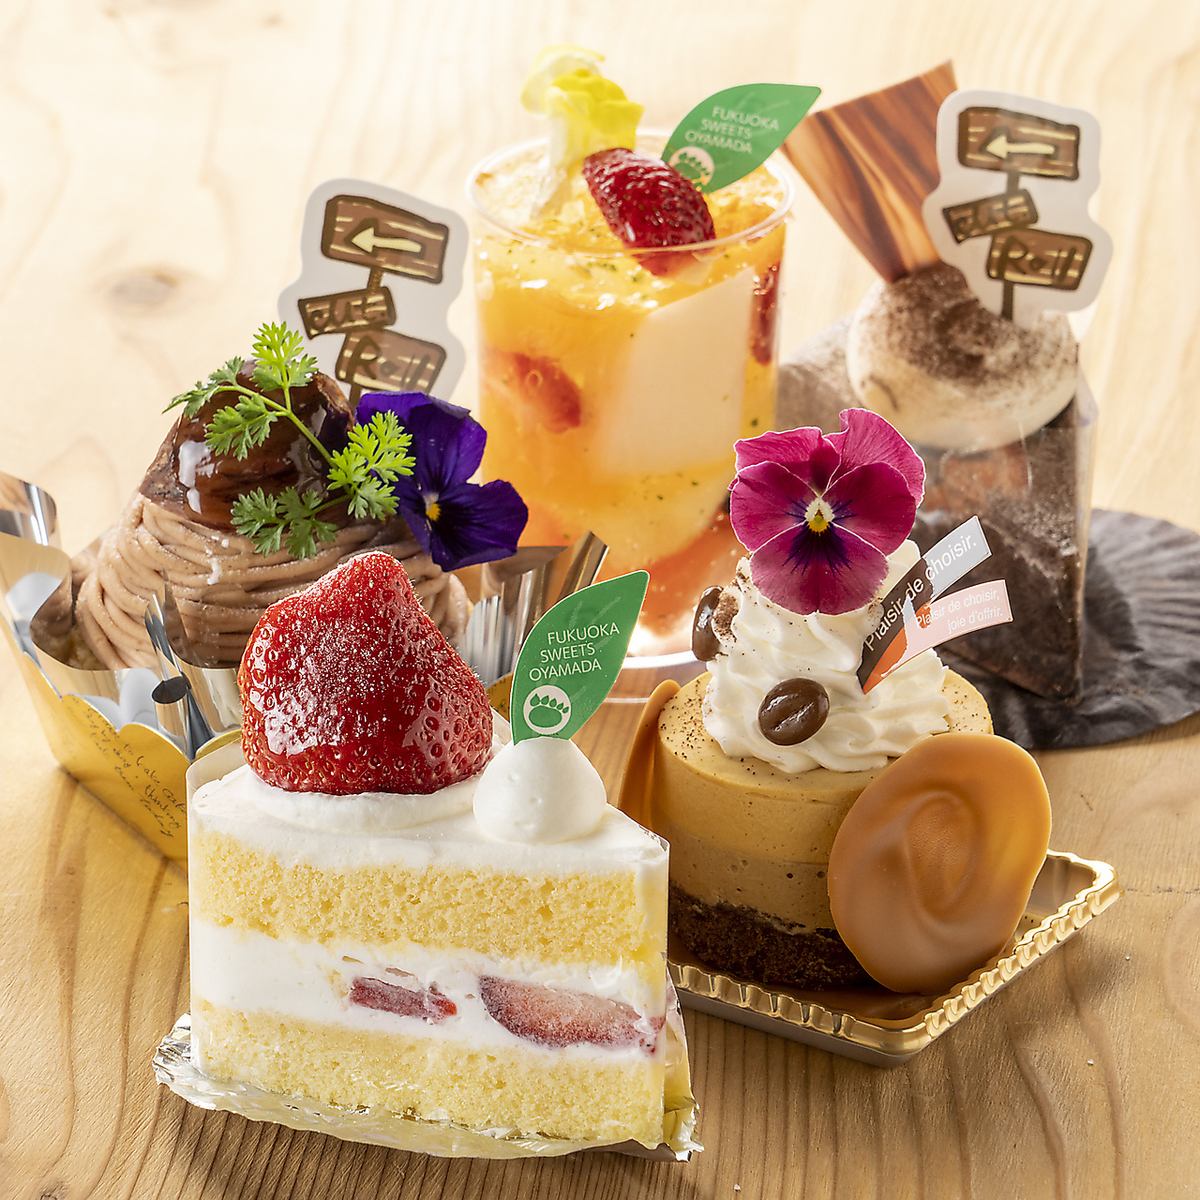 A town cake shop that uses plenty of seasonal fruits and ingredients.There is also a wood-like cafe space ♪